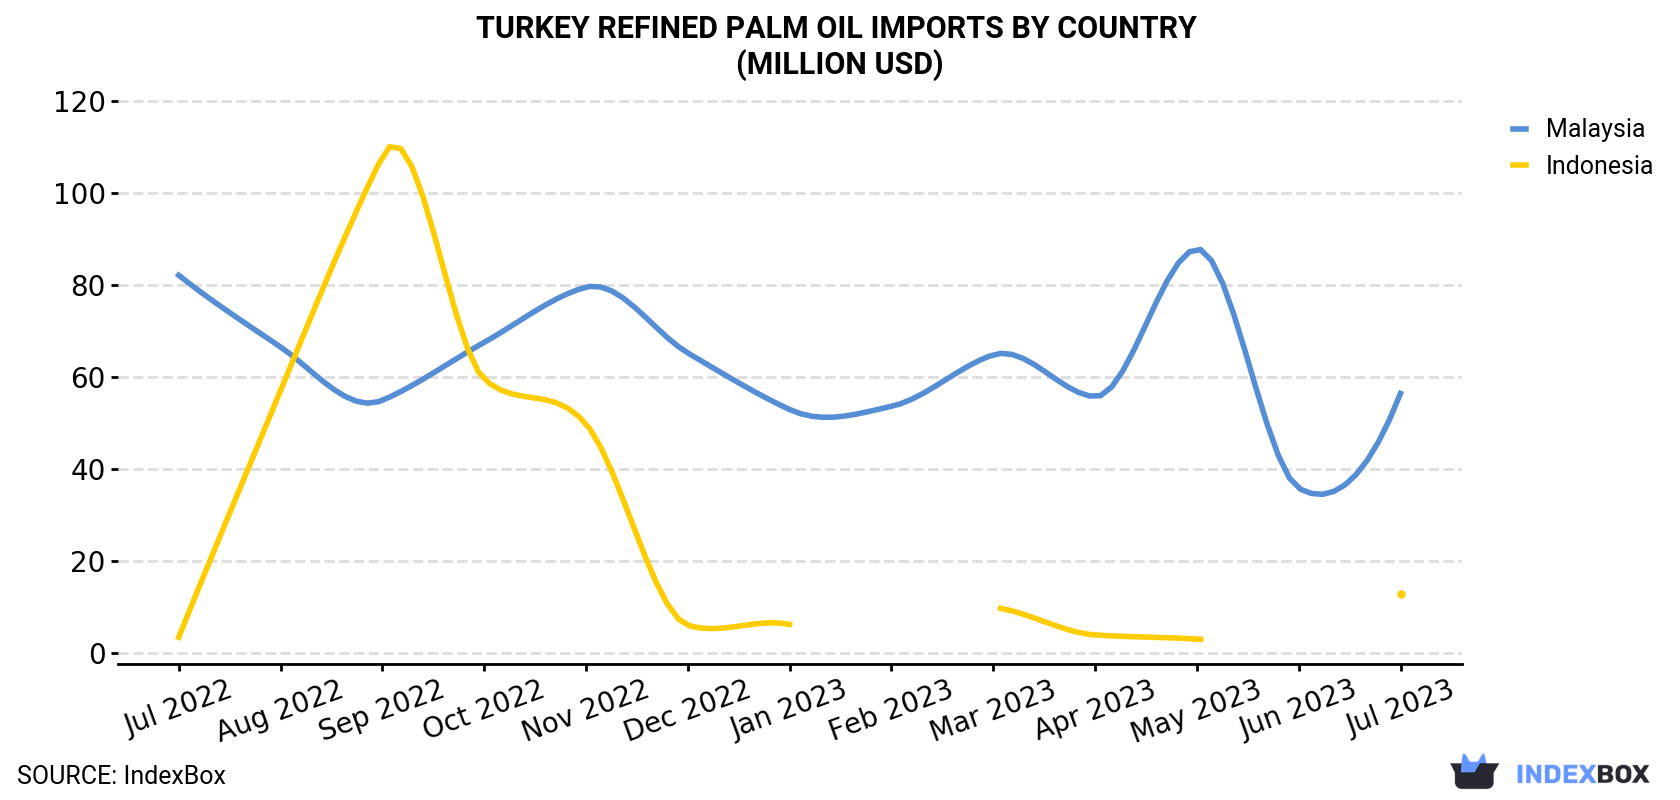 Turkey Refined Palm Oil Imports By Country (Million USD)